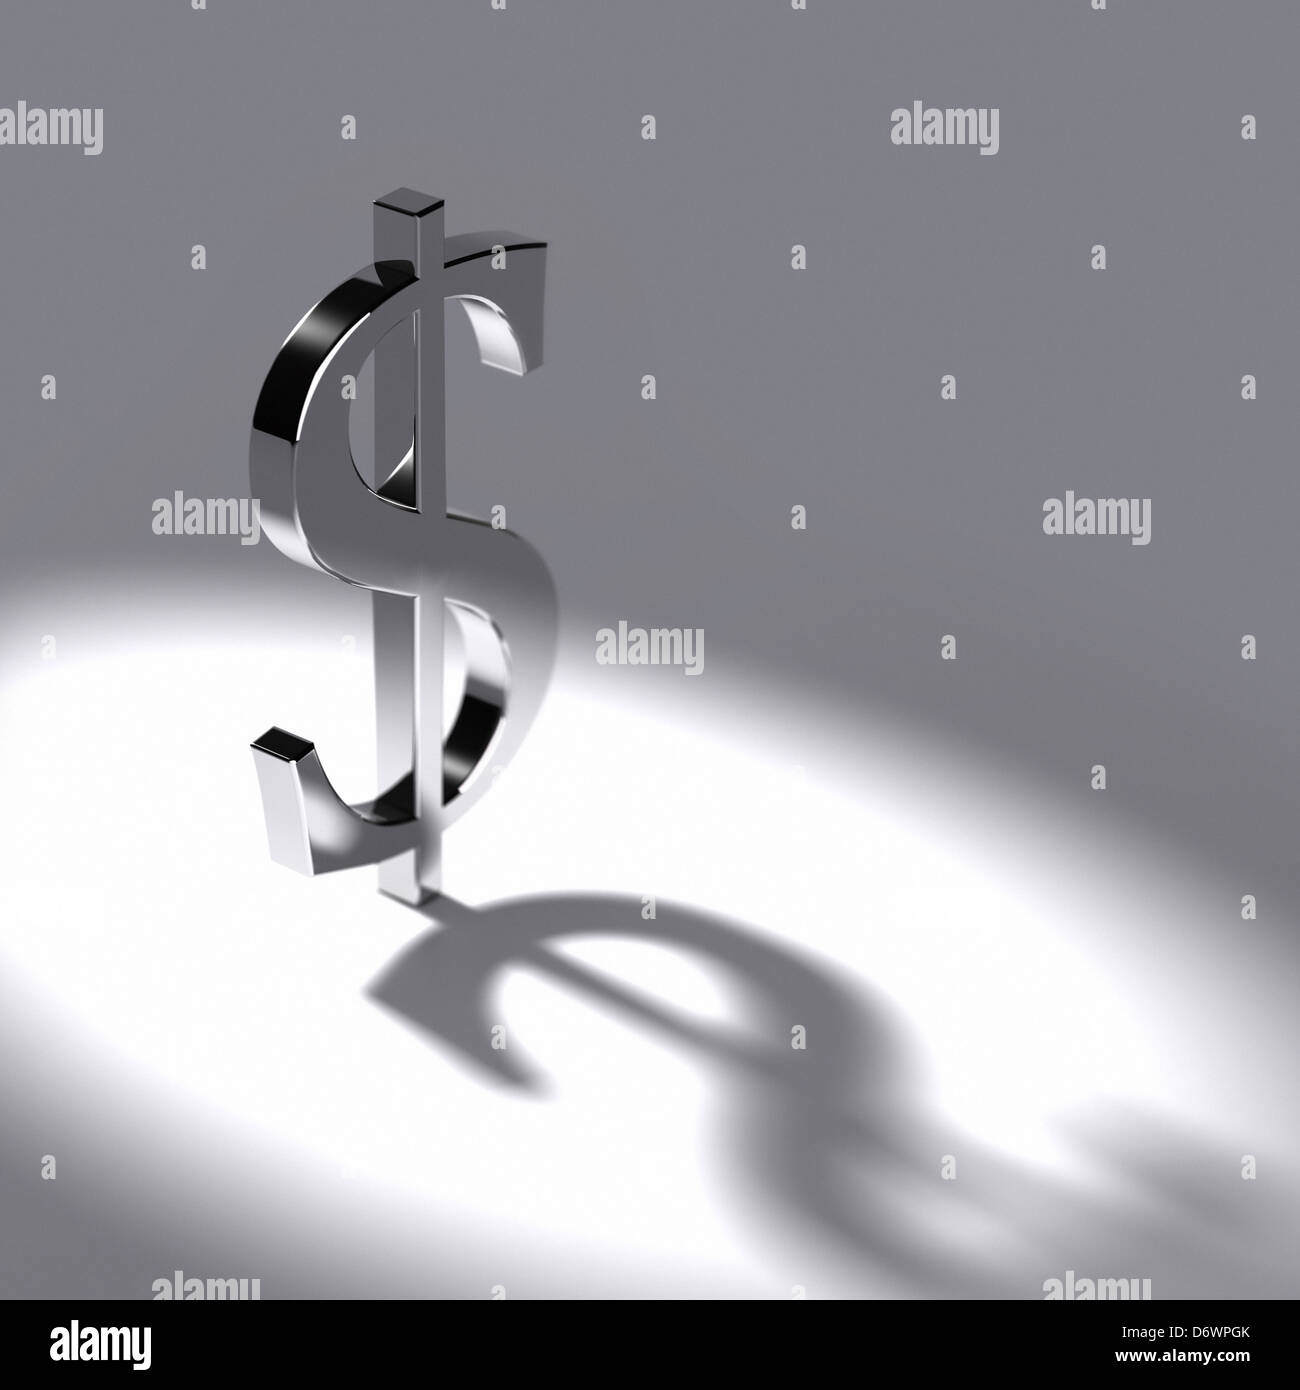 dollar figure or symbol onto a grey background with light effect and shadow Stock Photo